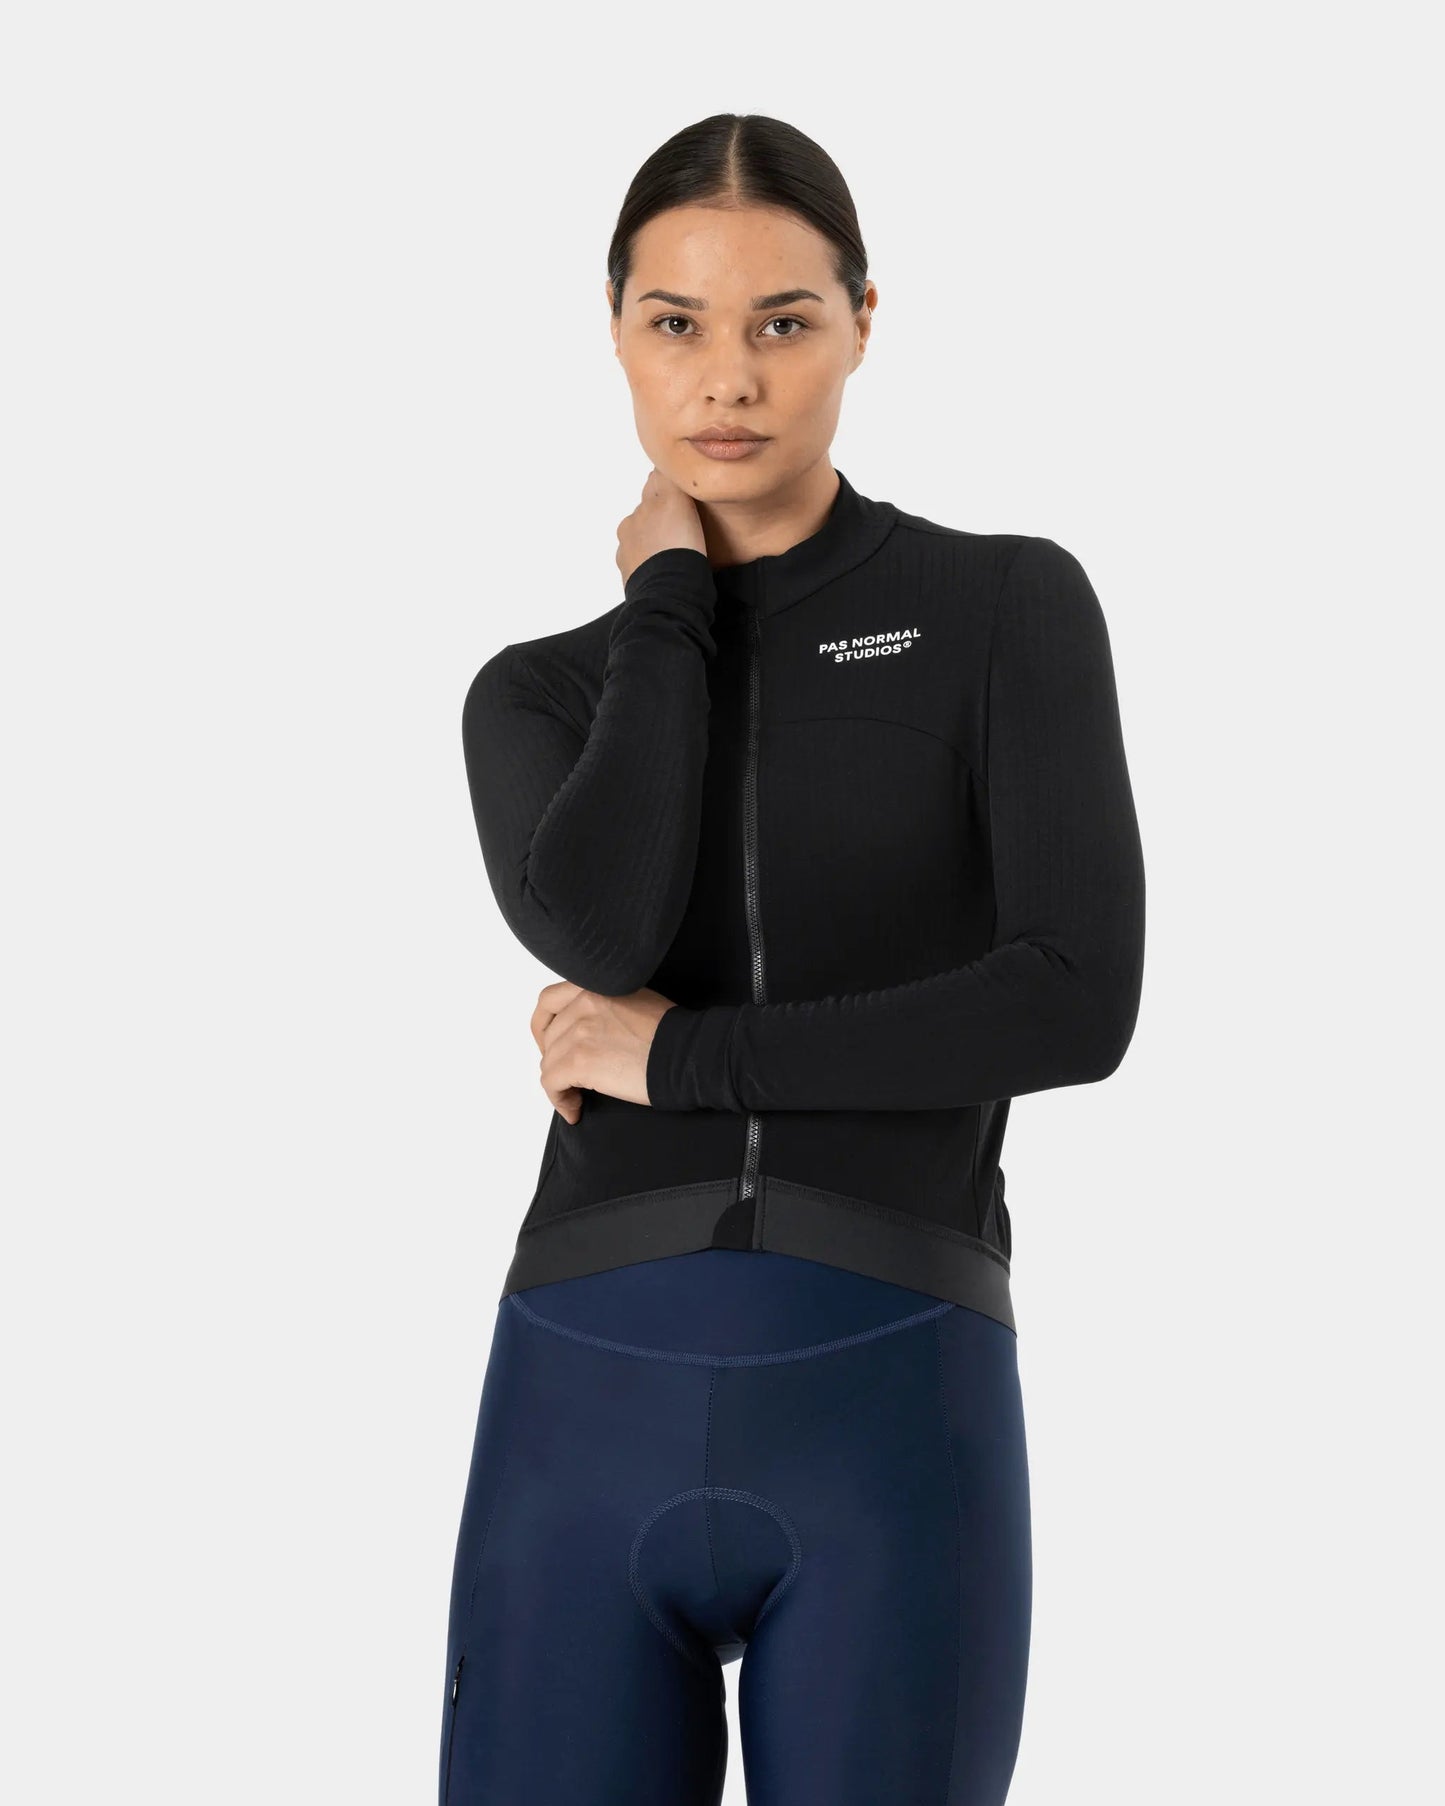 Maillot Essential Manches-longues Femme velocartel 